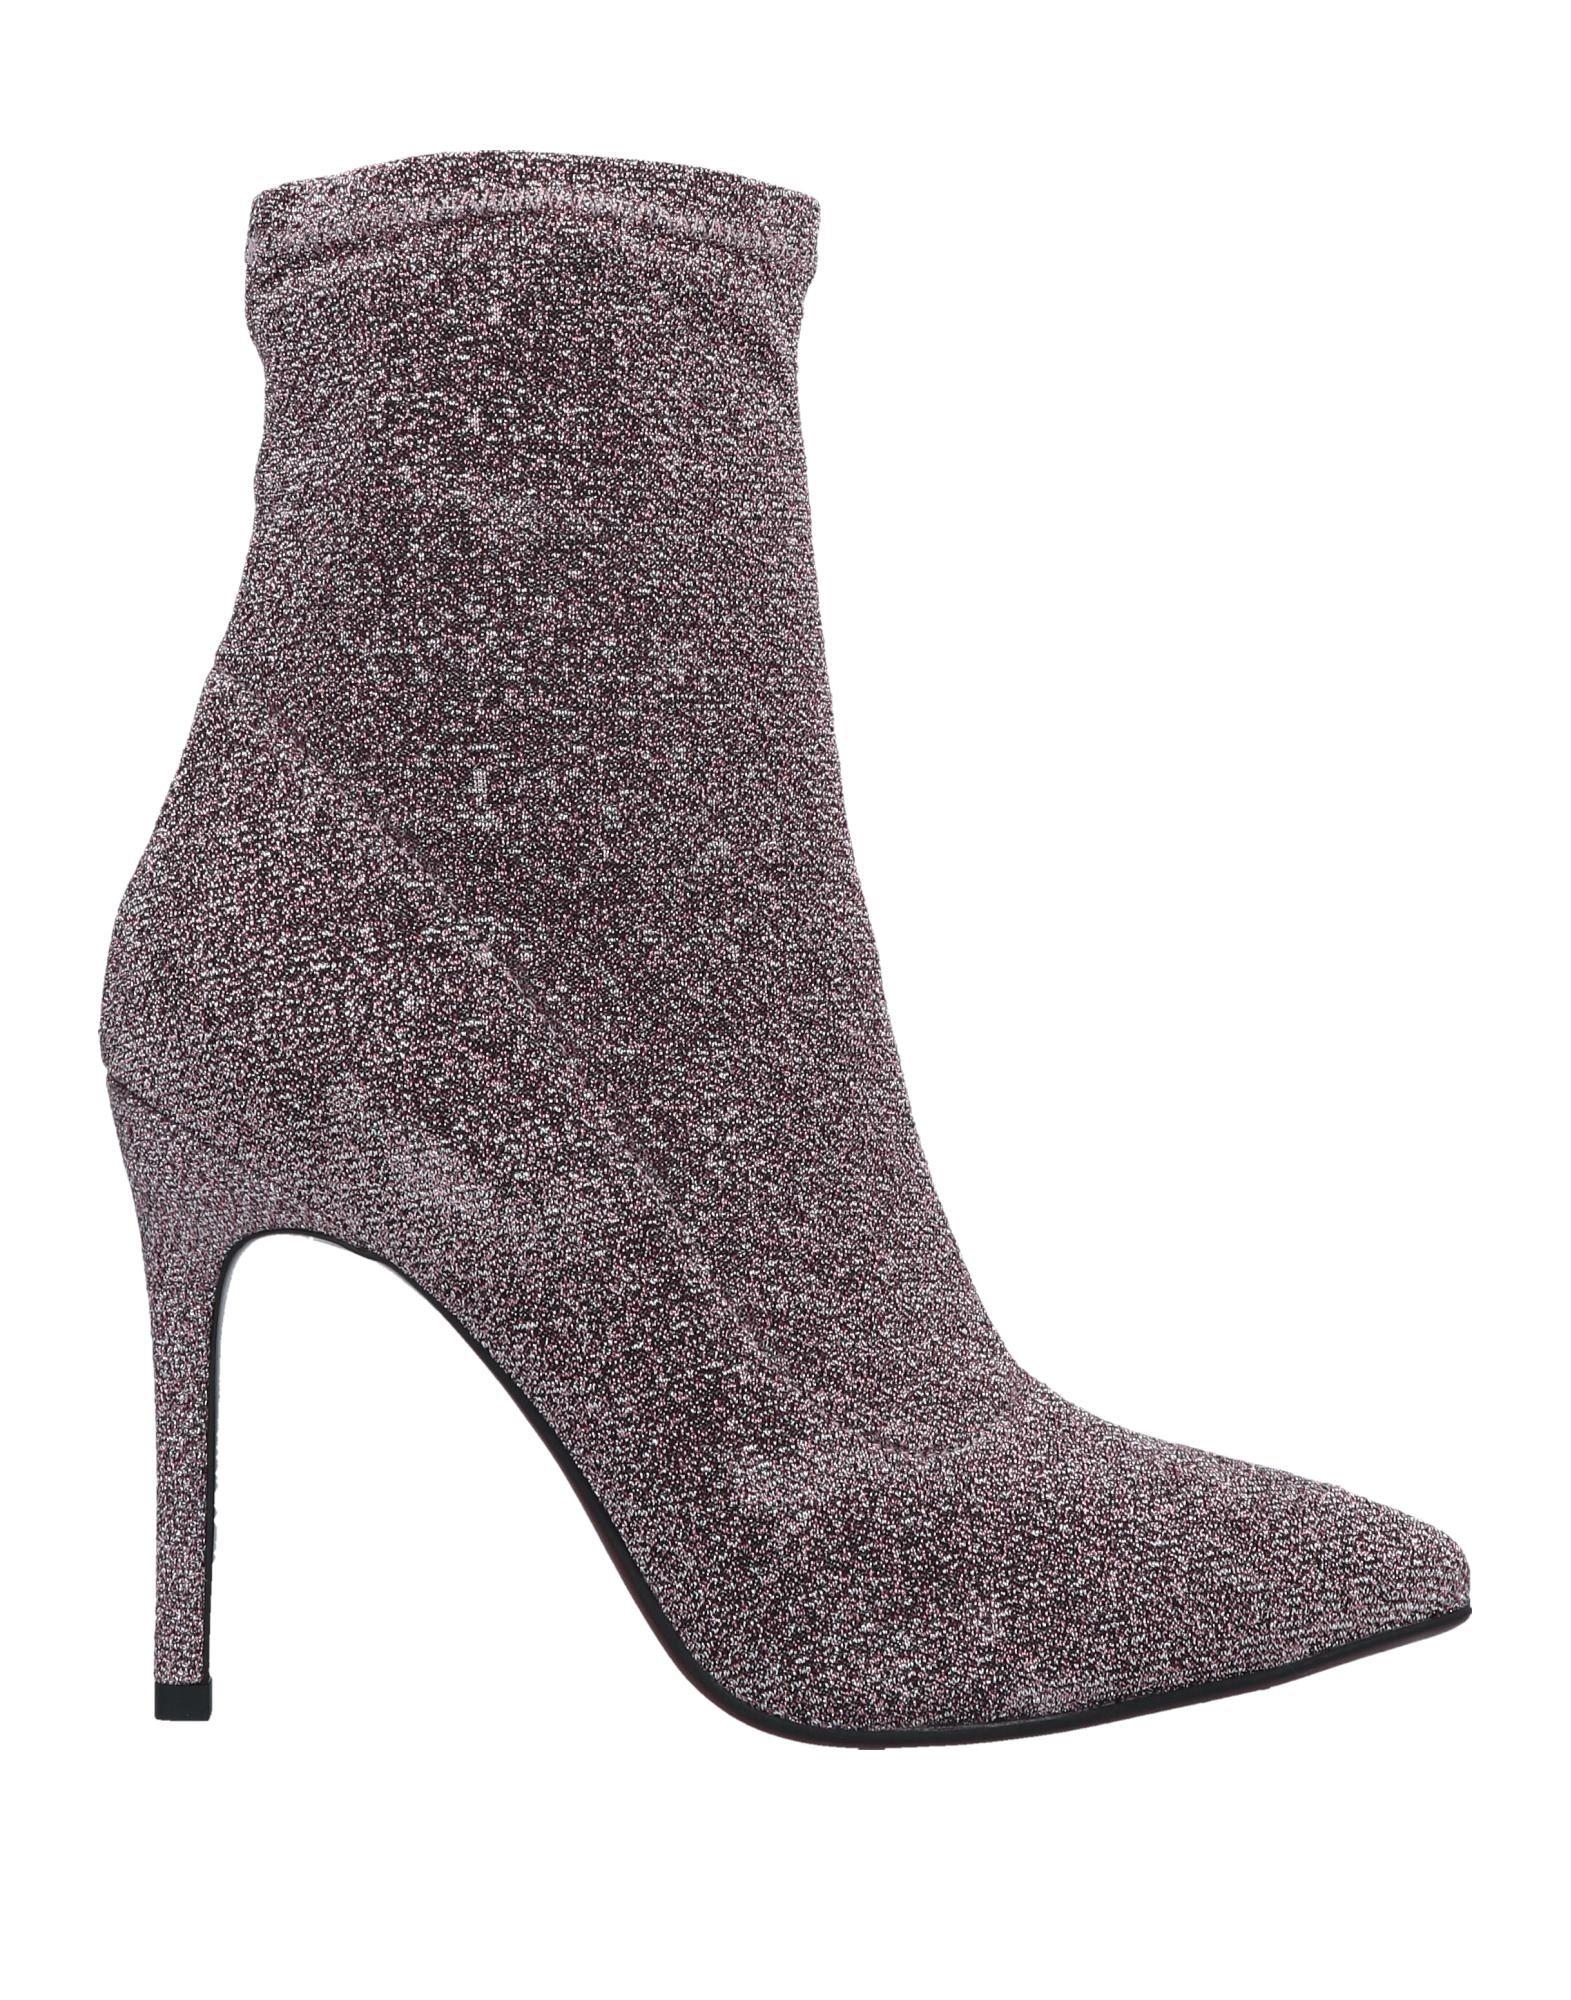 Essentiel Antwerp Leather Ankle Boots in Pink - Lyst